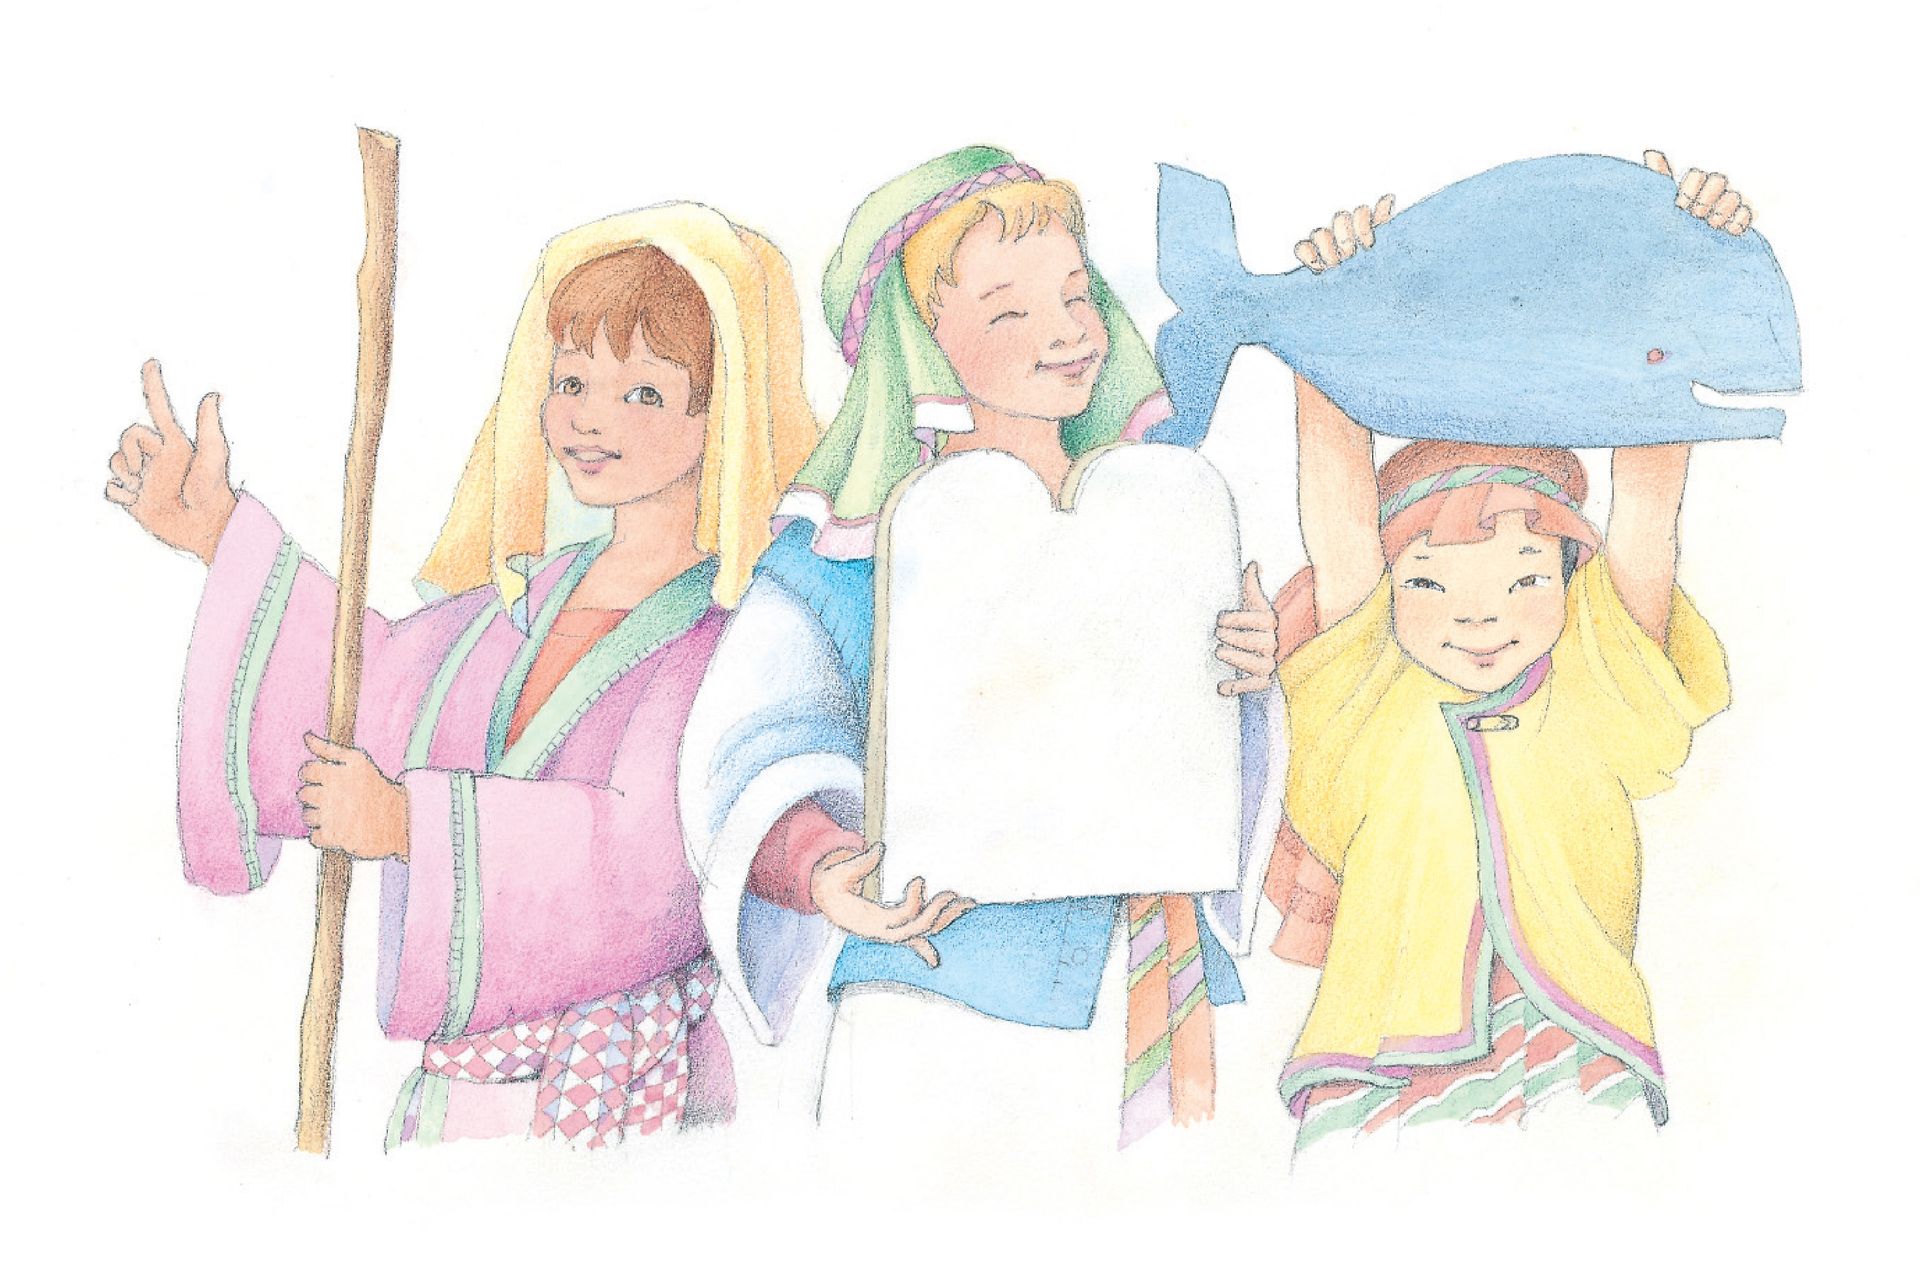 Three children dressed as biblical prophets. From the Children’s Songbook, page 110, “Follow the Prophet”; watercolor illustration by Phyllis Luch.